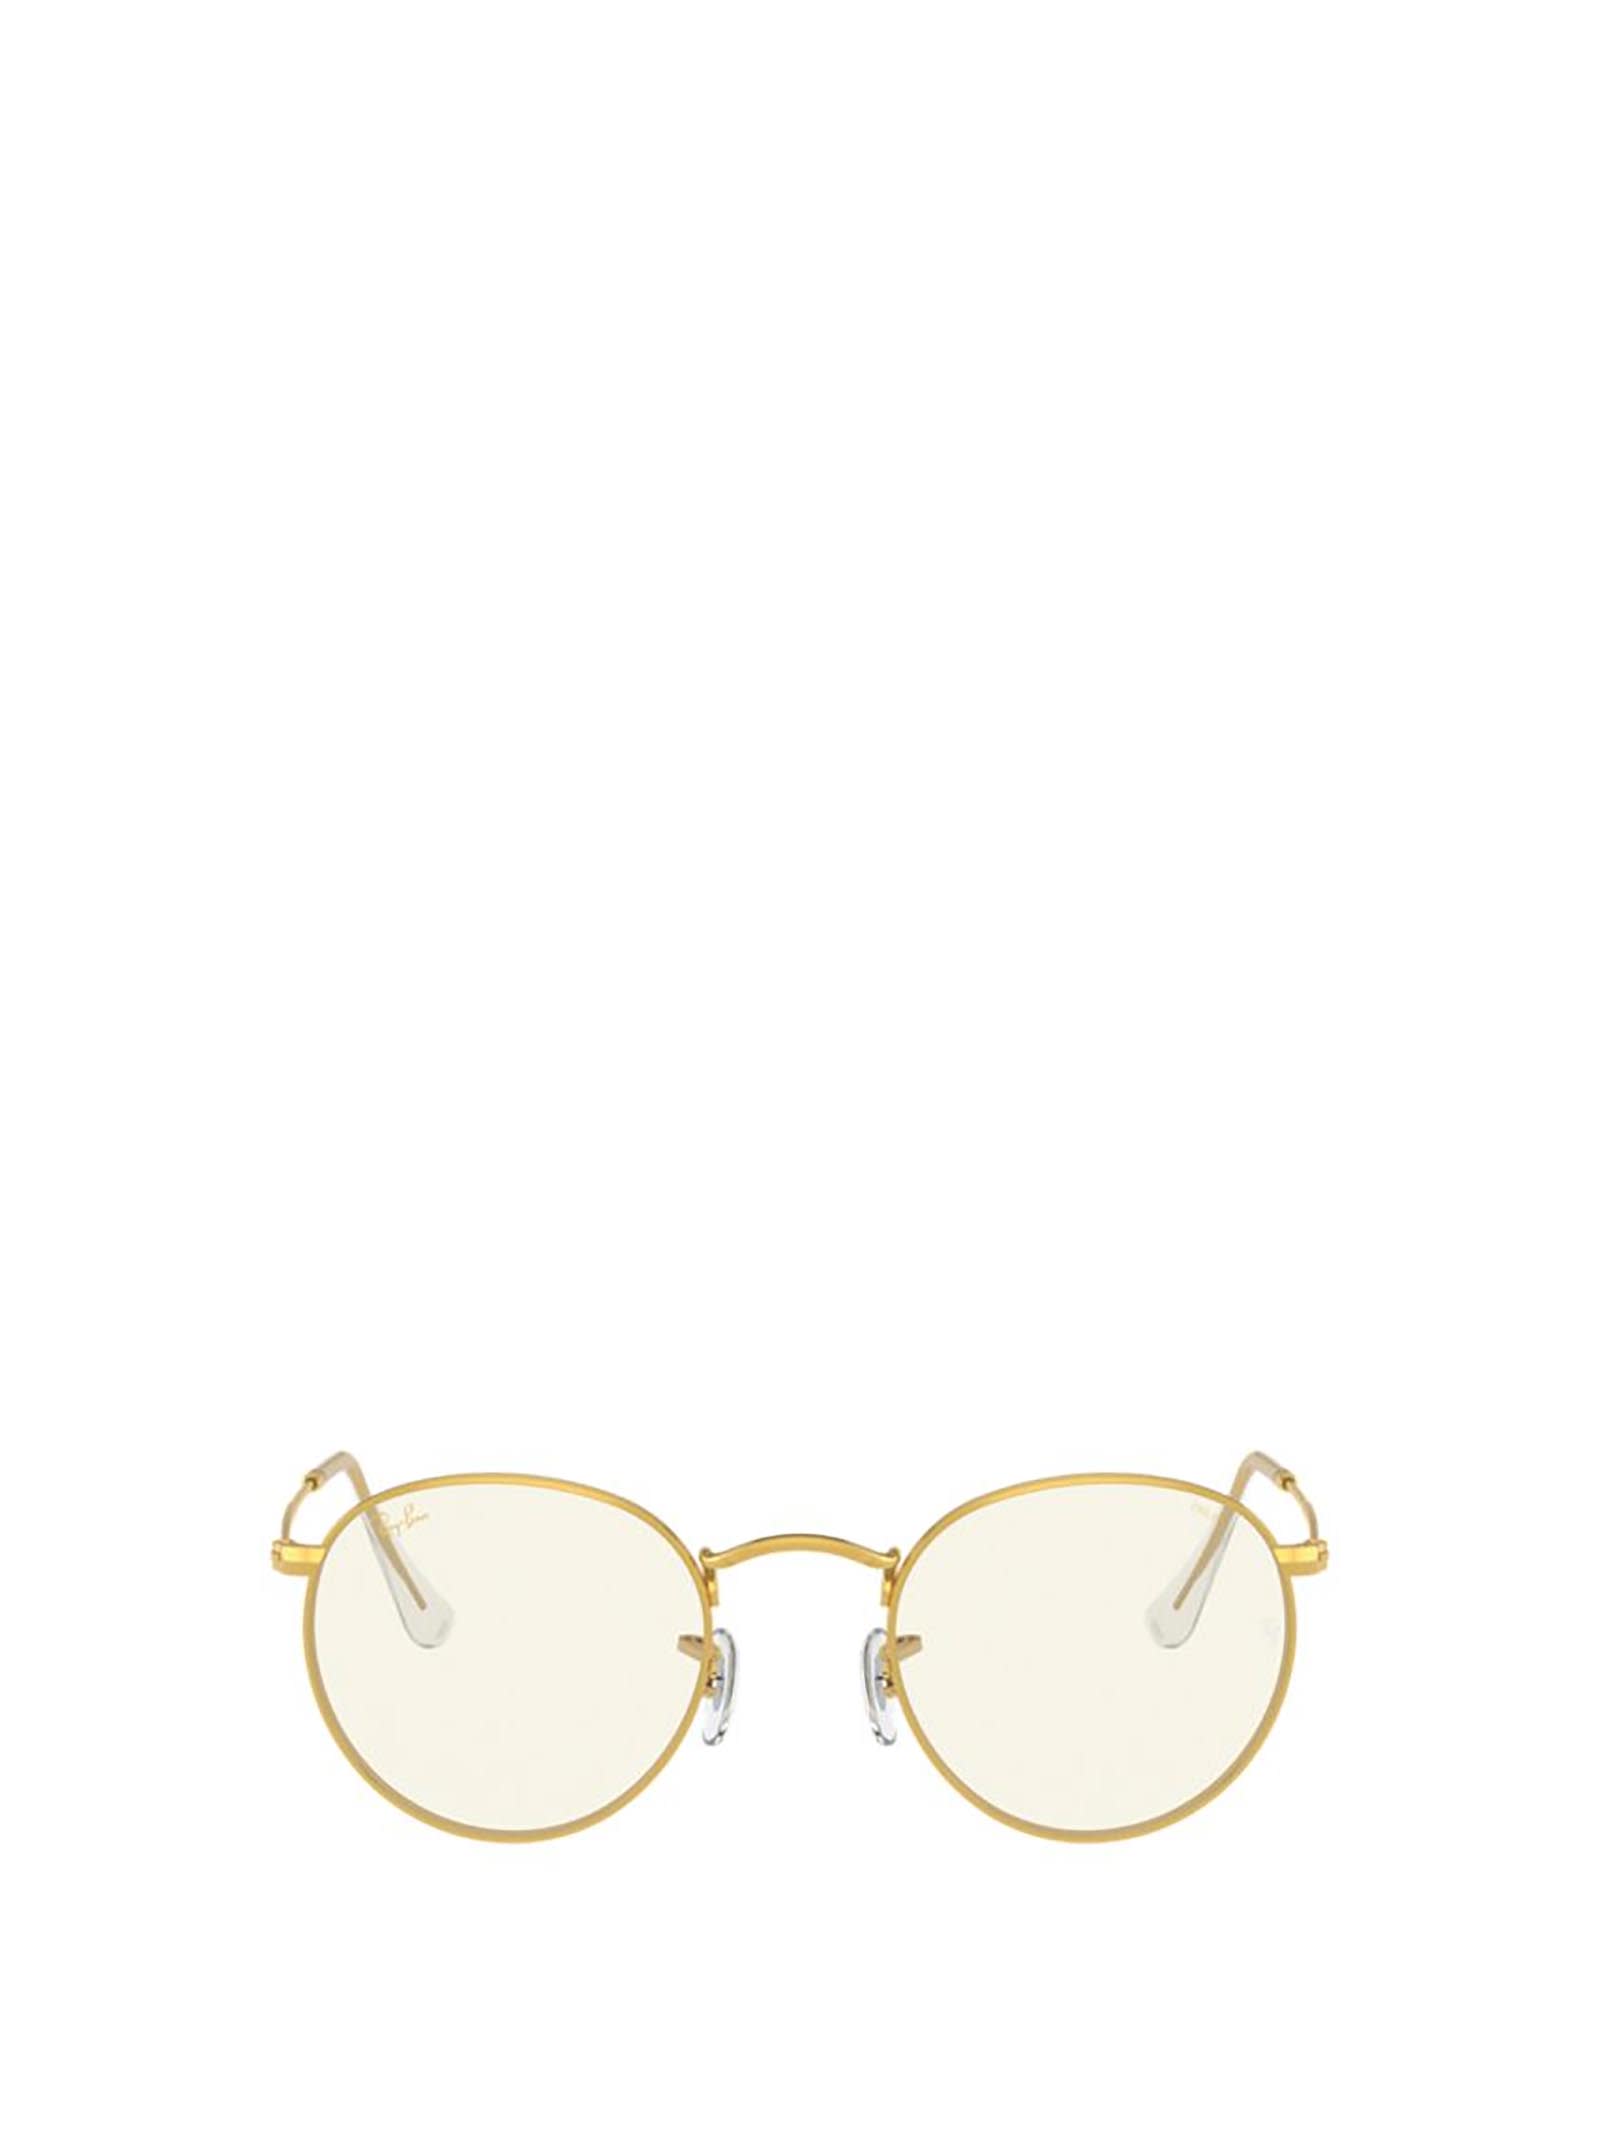 Ray Ban Ray-ban Rb3447 Legend Gold Sunglasses